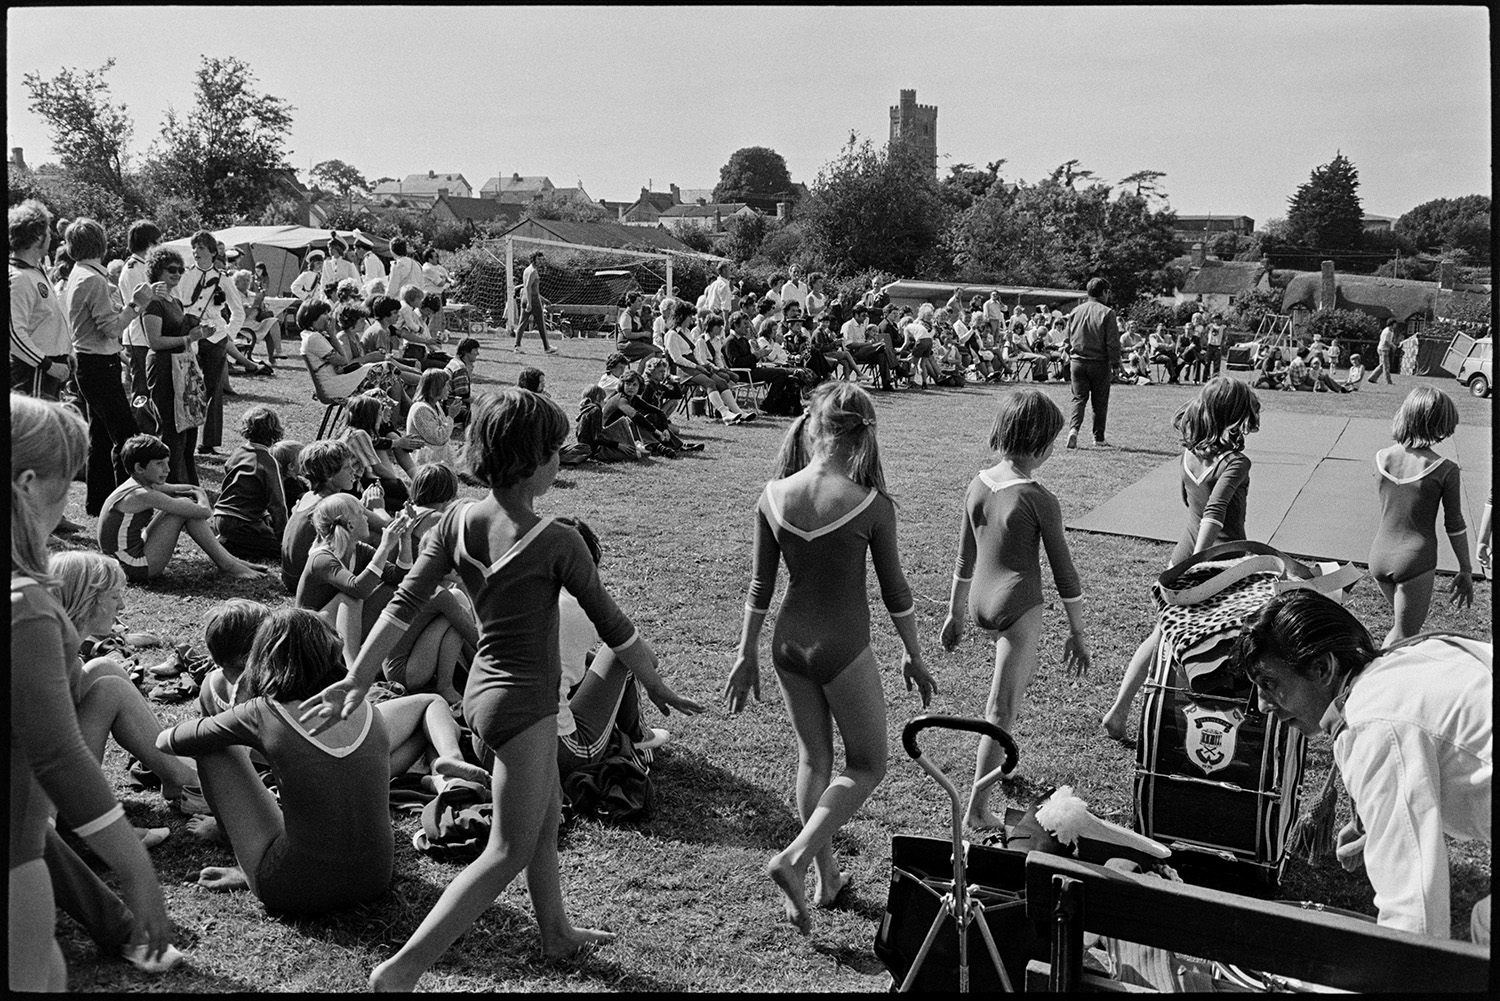 Gymnasts at fete. 
[Girl gymnasts walking out to perform at Atherington Village fete. A crowd has gathered to watch them.]